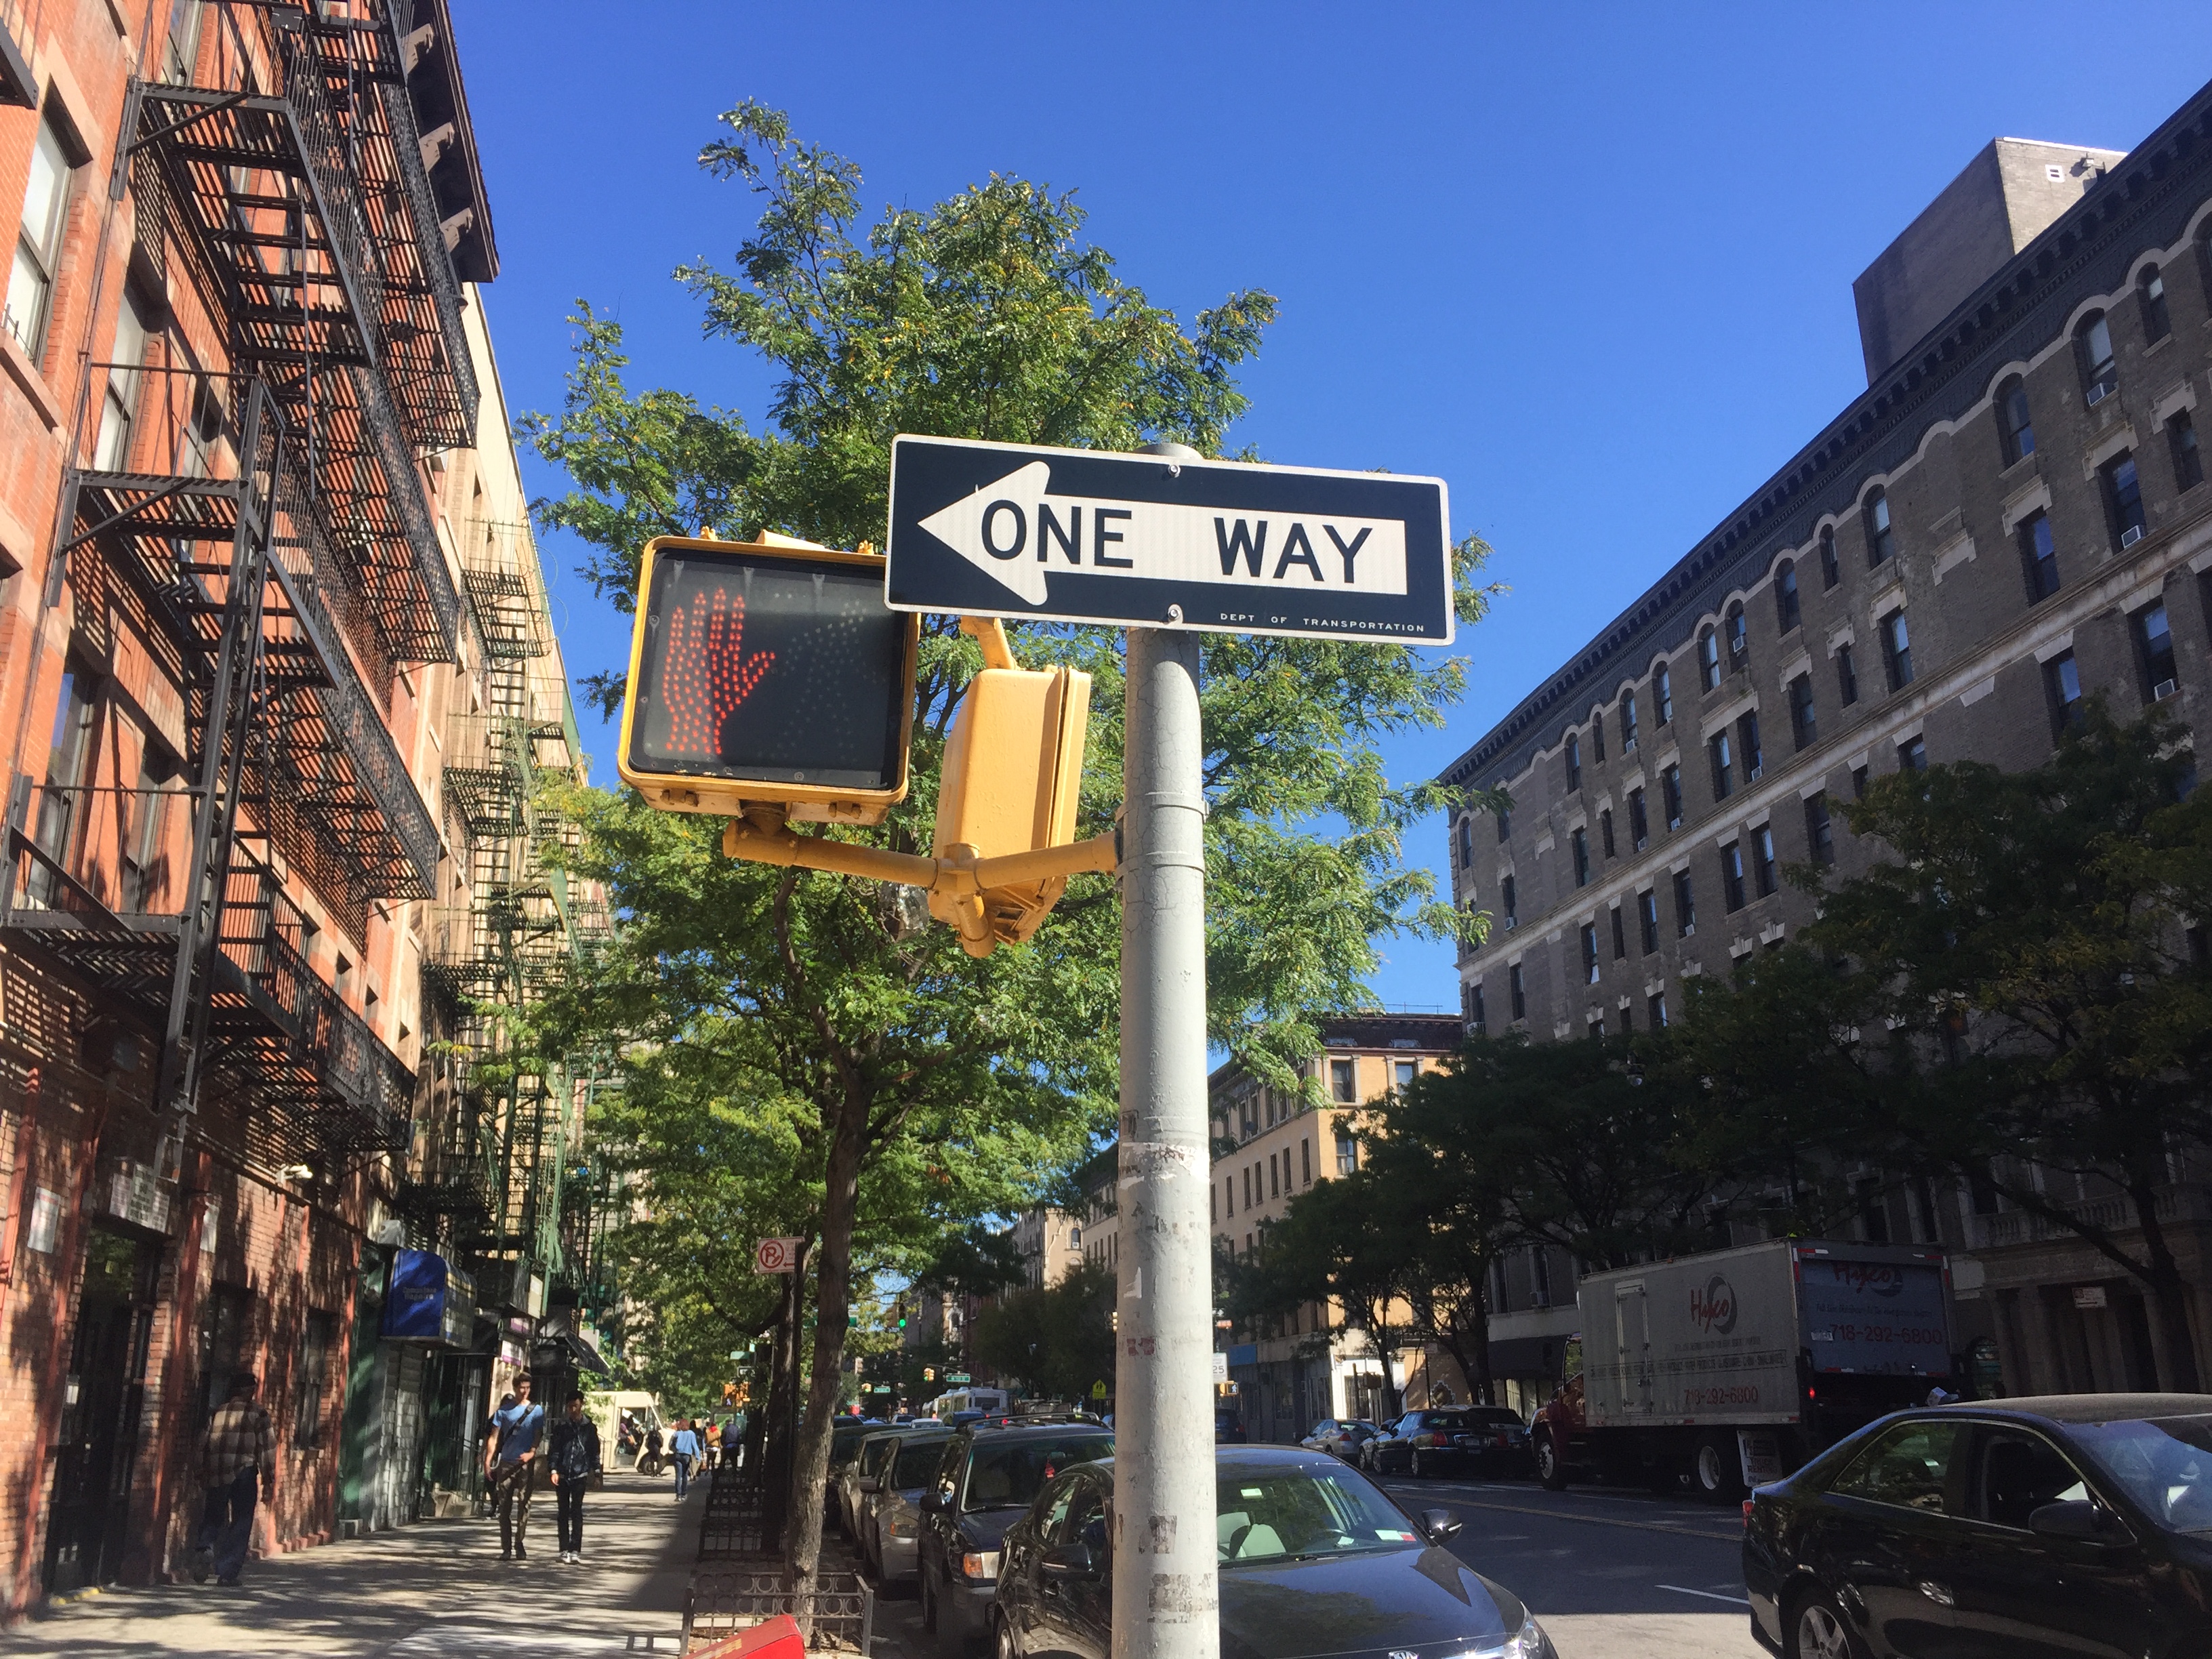 Are you headed down a one-way street?